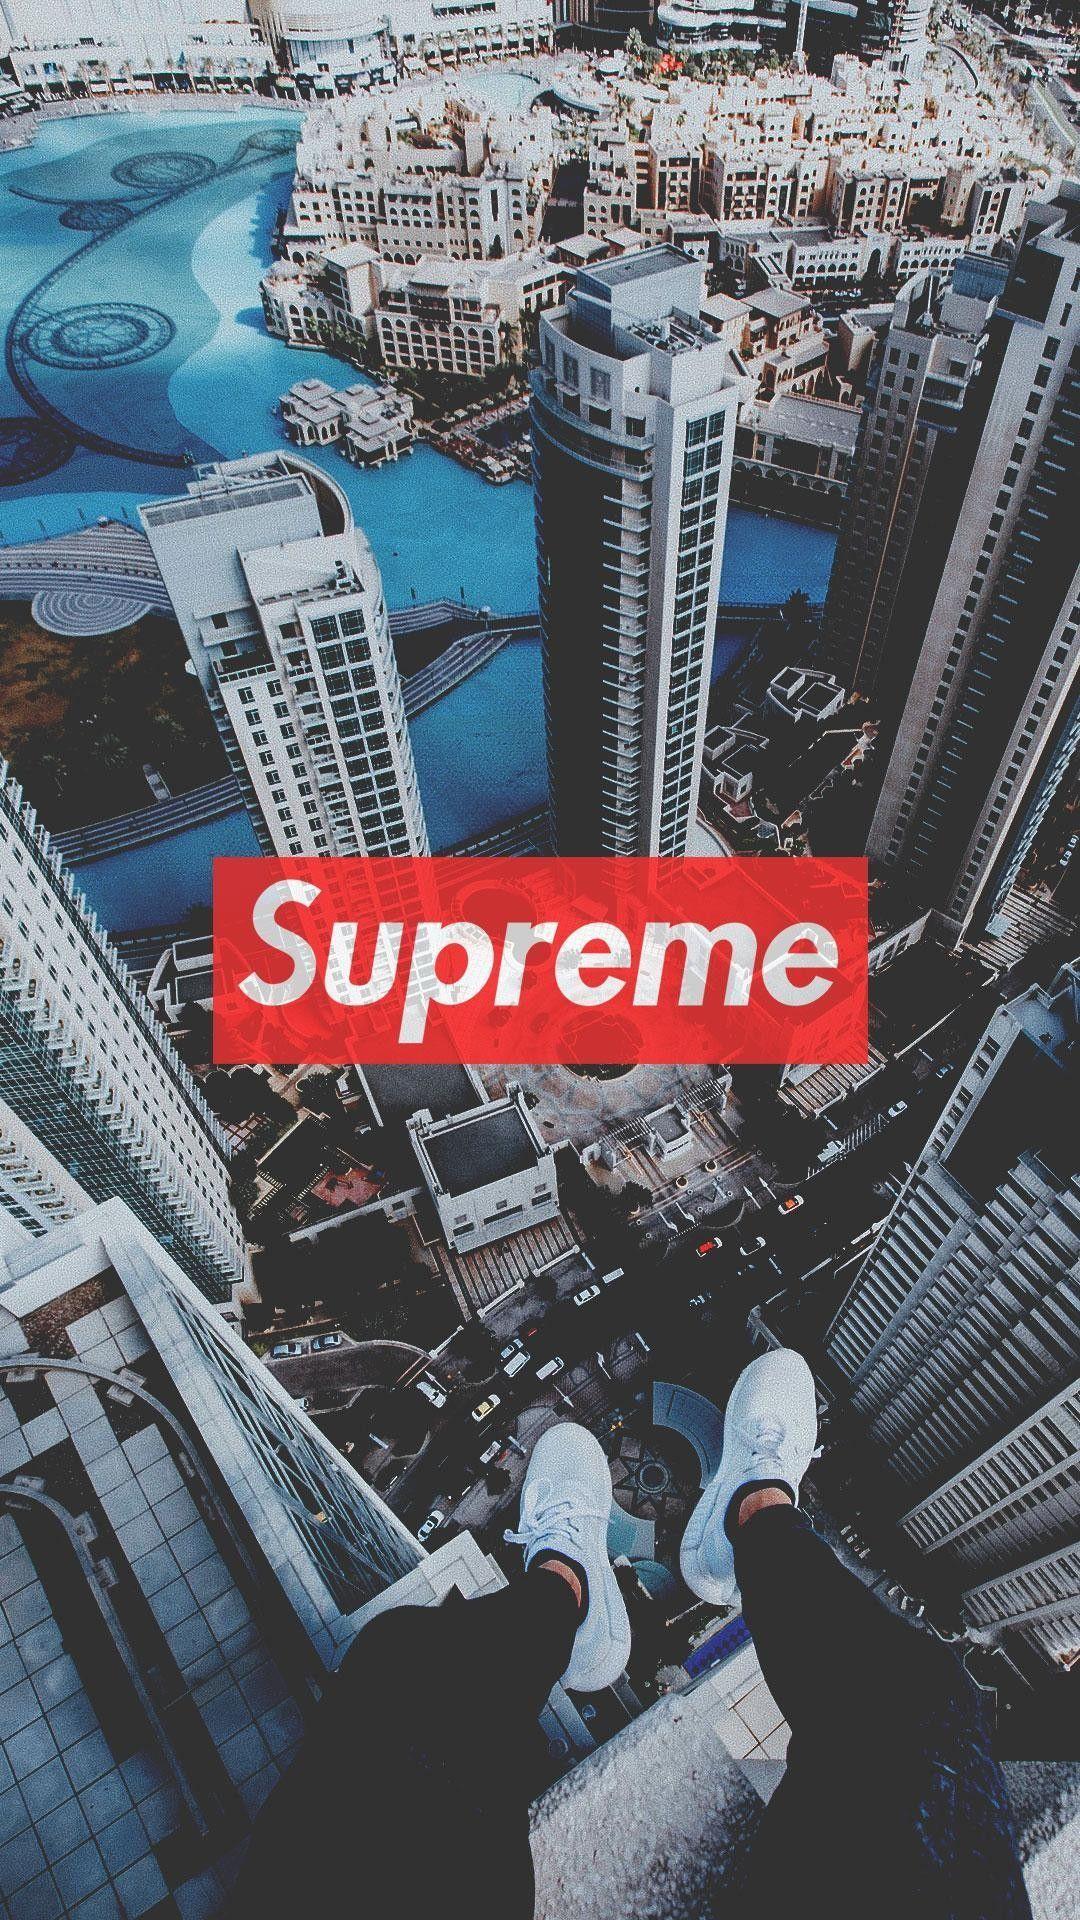 Top 999+ Hypebeast Wallpaper Full HD, 4K✓Free to Use